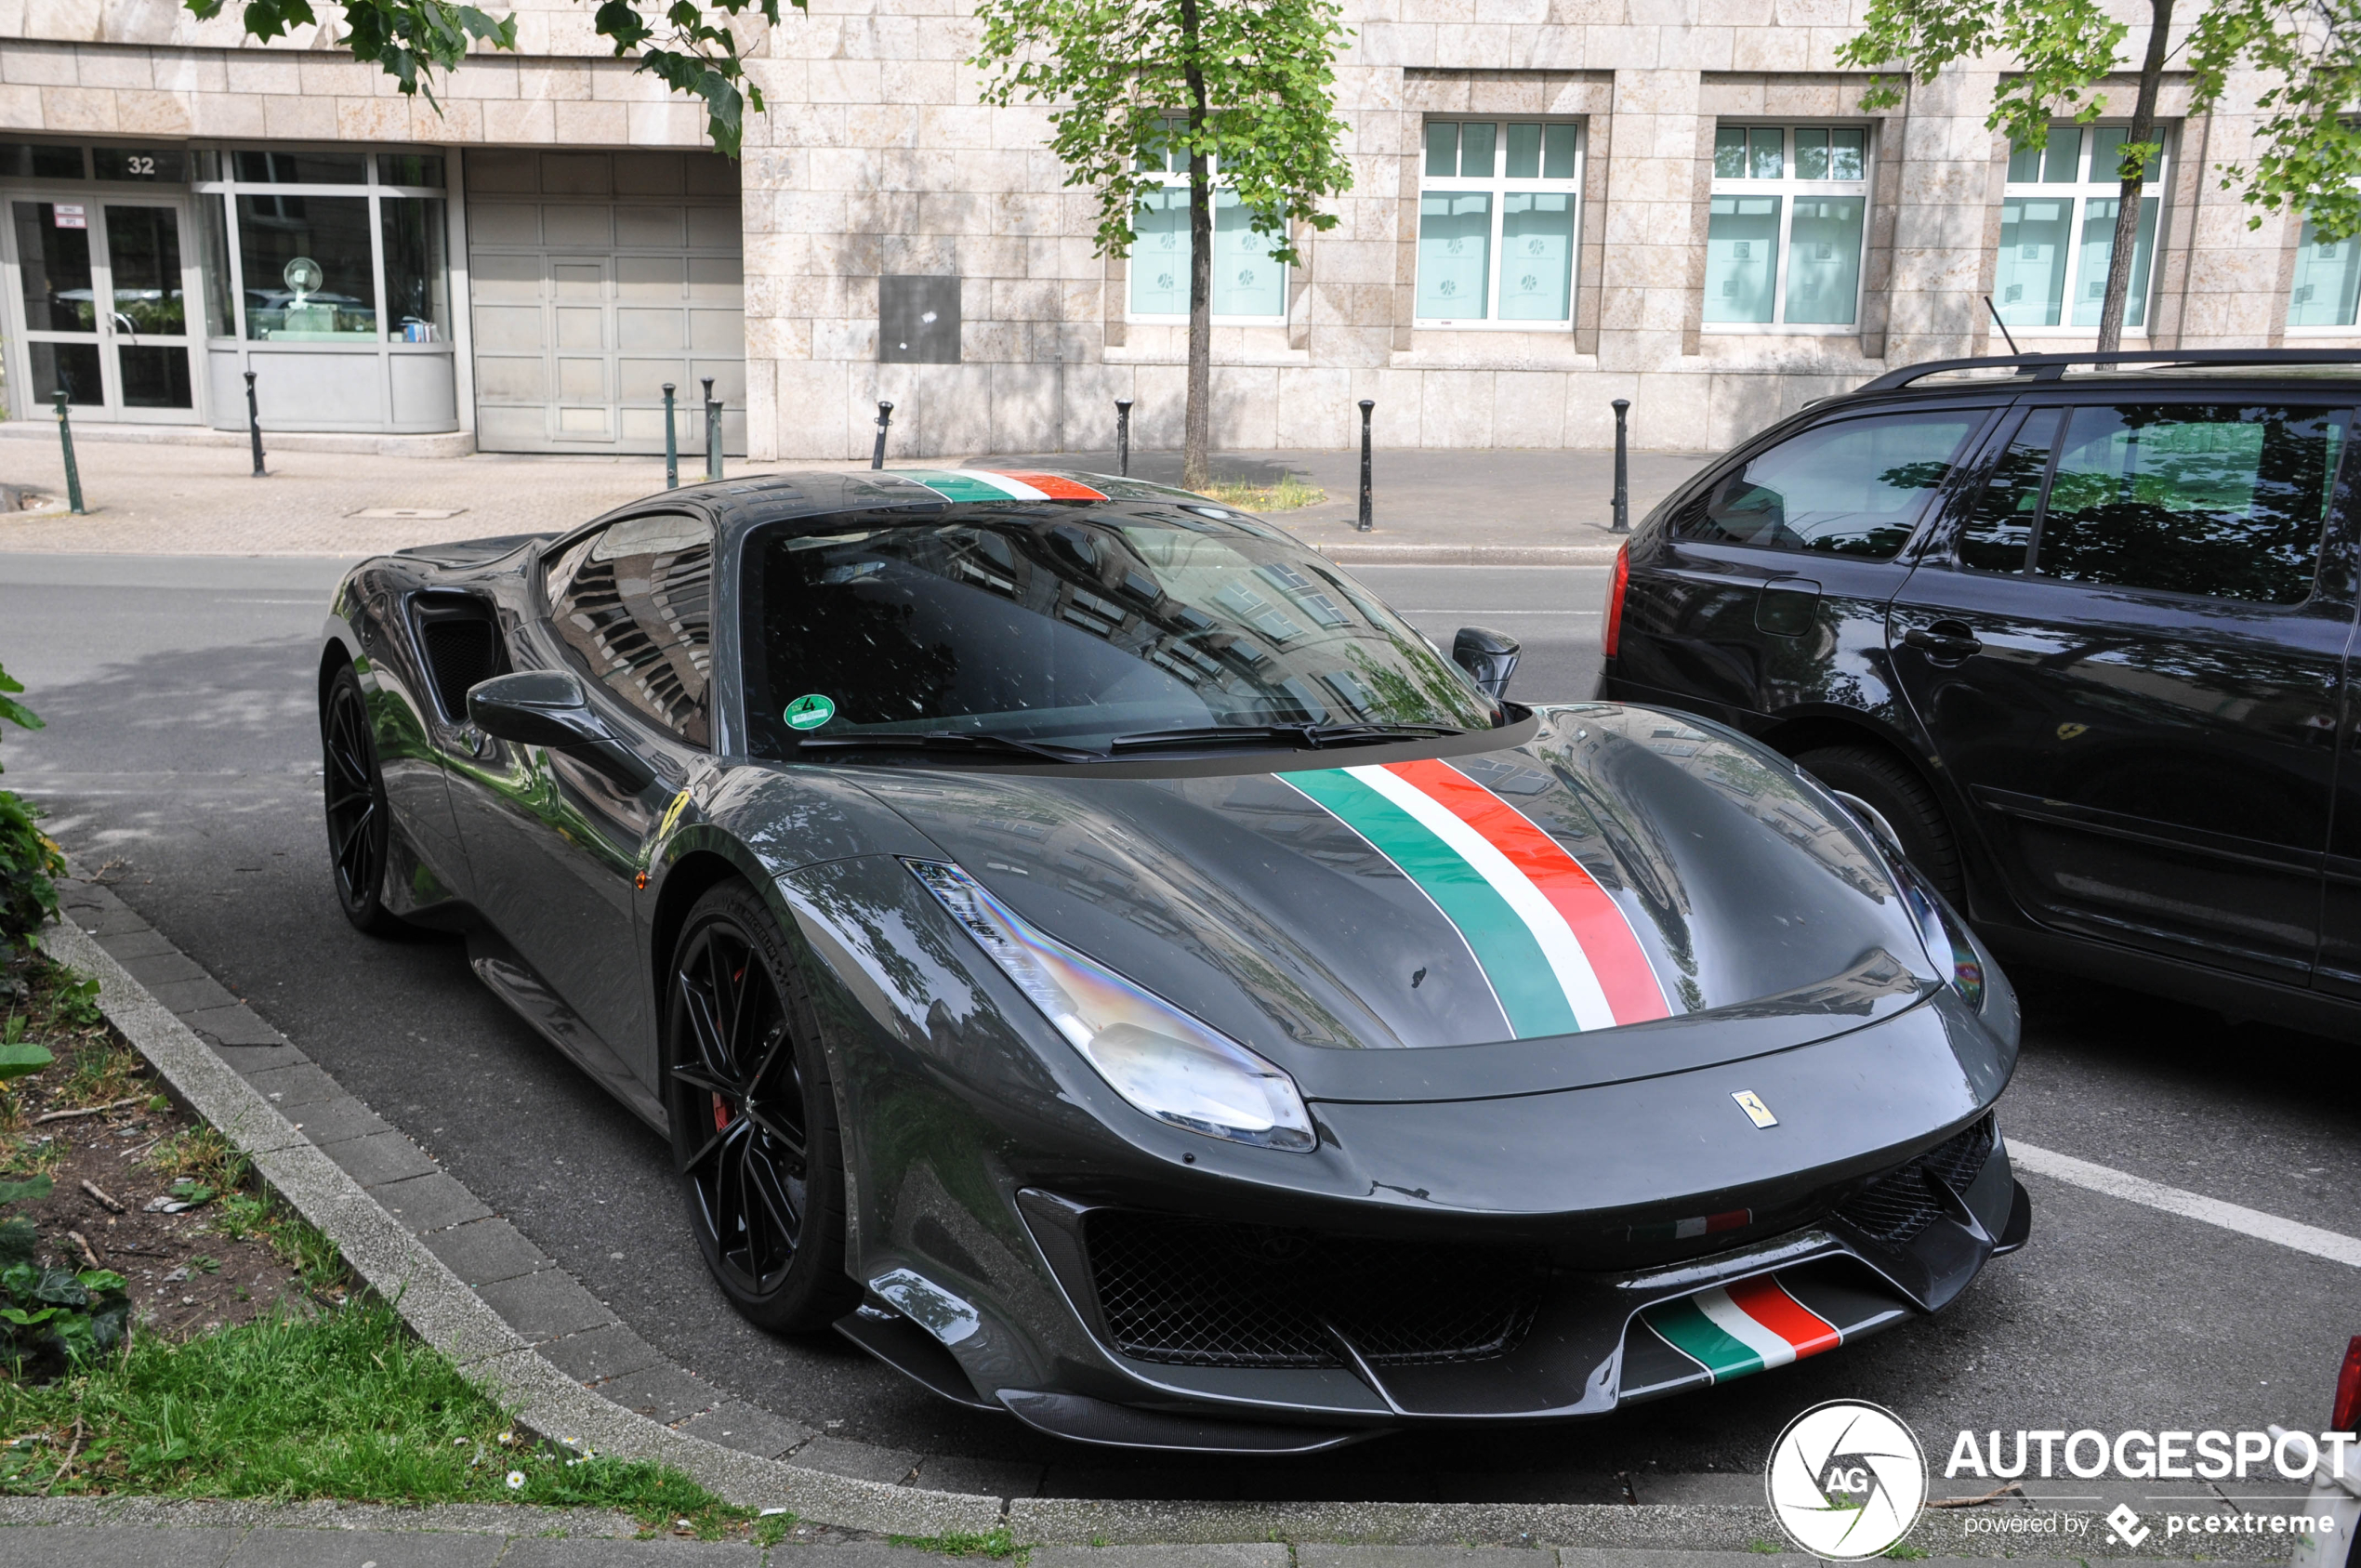 This 488 Pista is the proud bearer of the tricolore